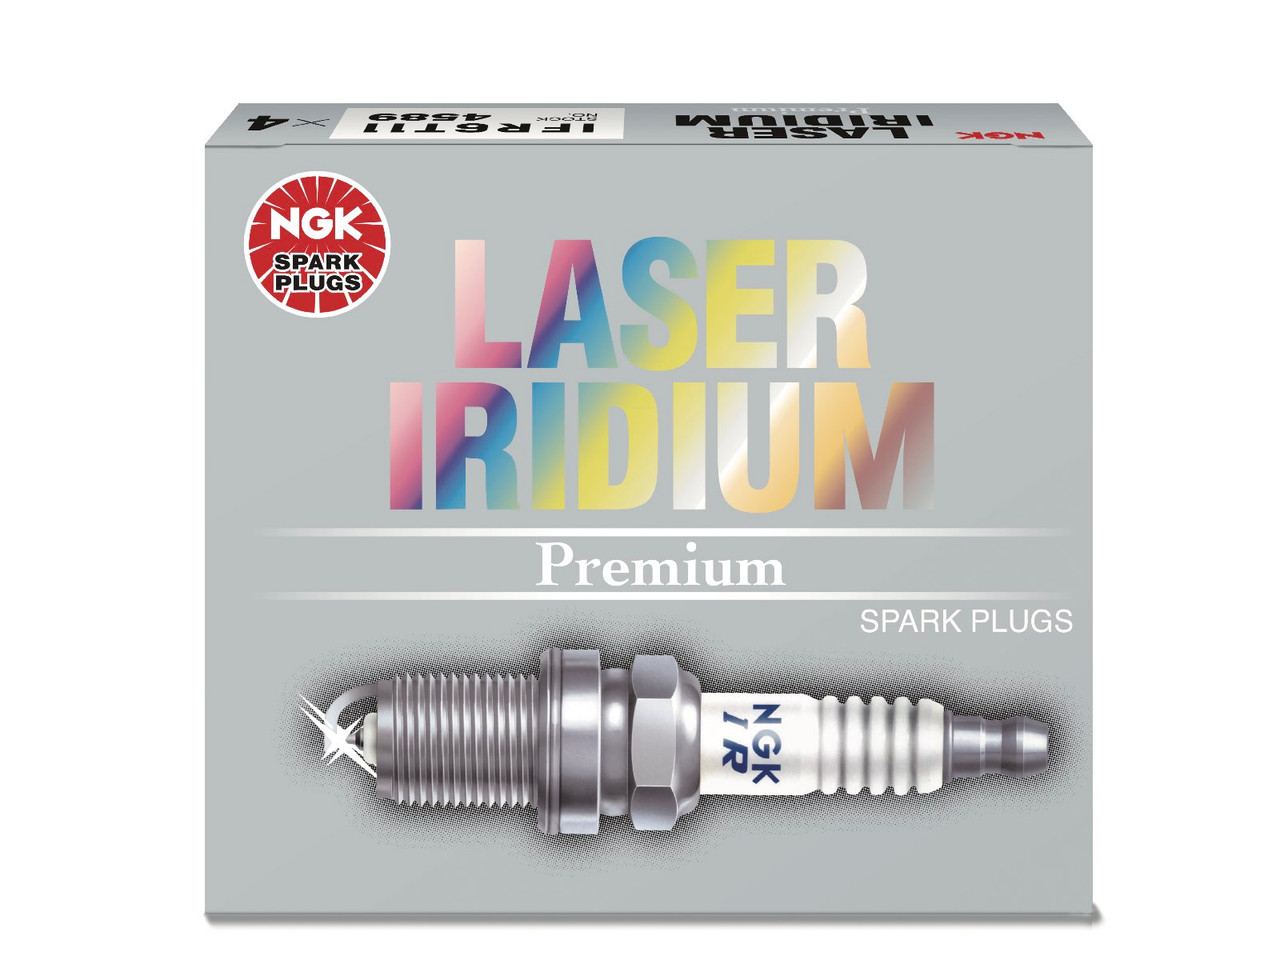 https://cdn11.bigcommerce.com/s-351ed/images/stencil/{:size}/products/24665/104650/spark_plugs_for_mini_convertible_r57_cabrio_ngk_laser_iridium_QI31G14_24665__33364.1681421118.jpg?c=2